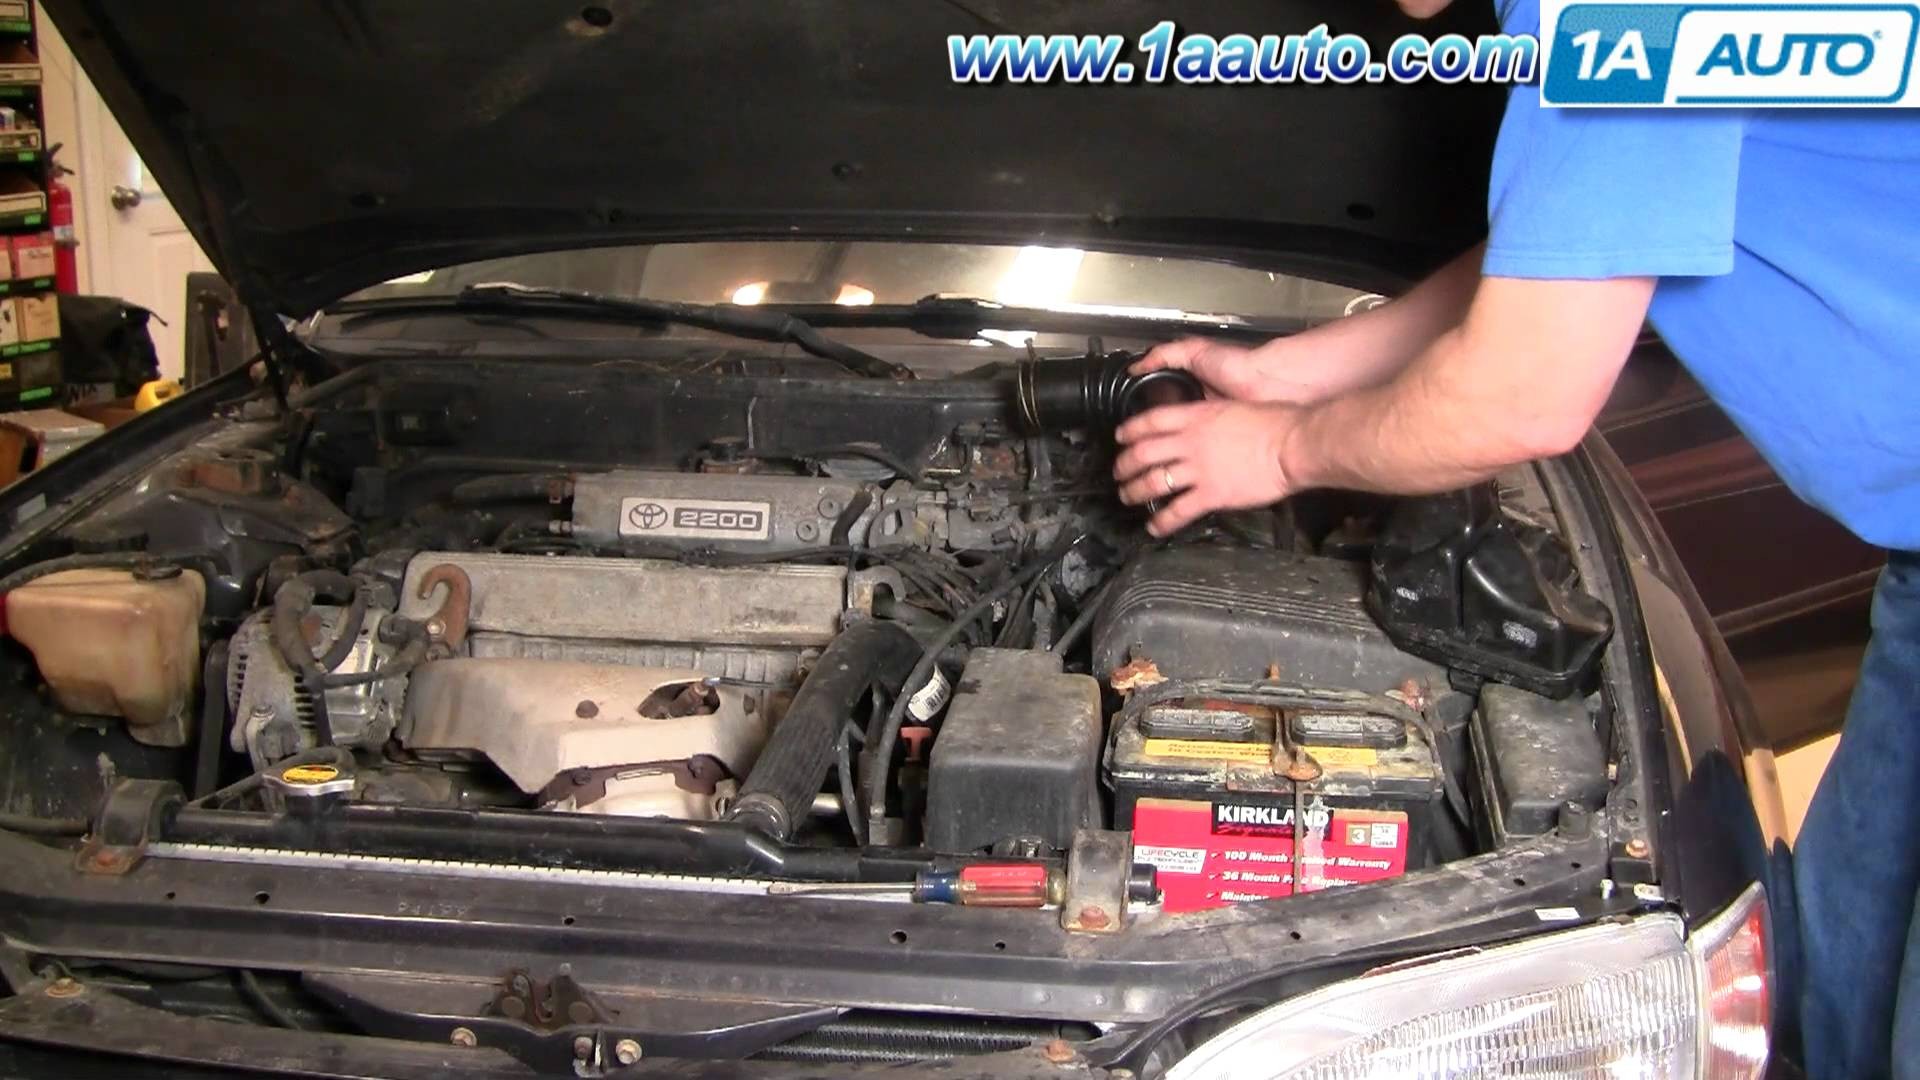 2001 toyota Camry 4 Cylinder Engine Diagram How to Install Replace Engine Air Intake Hose toyota Camry 2 2l 95 Of 2001 toyota Camry 4 Cylinder Engine Diagram